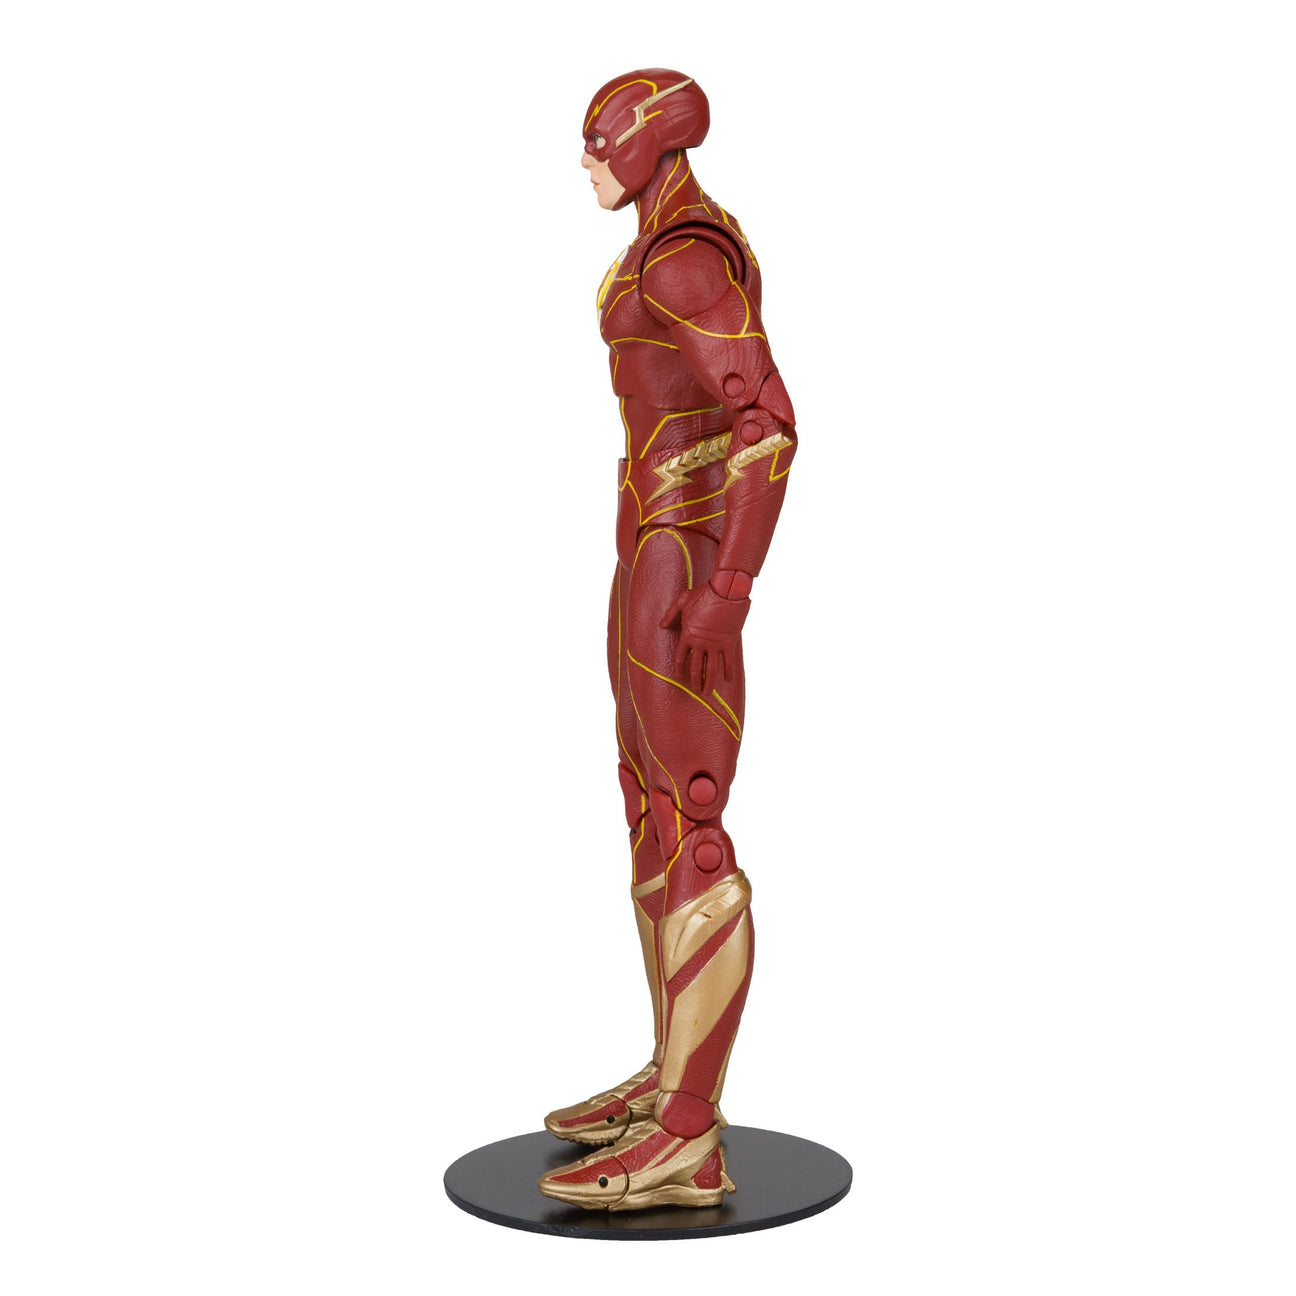 DC Multiverse: The Flash (Speed Force Variant, Gold Label)-Actionfiguren-McFarlane Toys-Mighty Underground